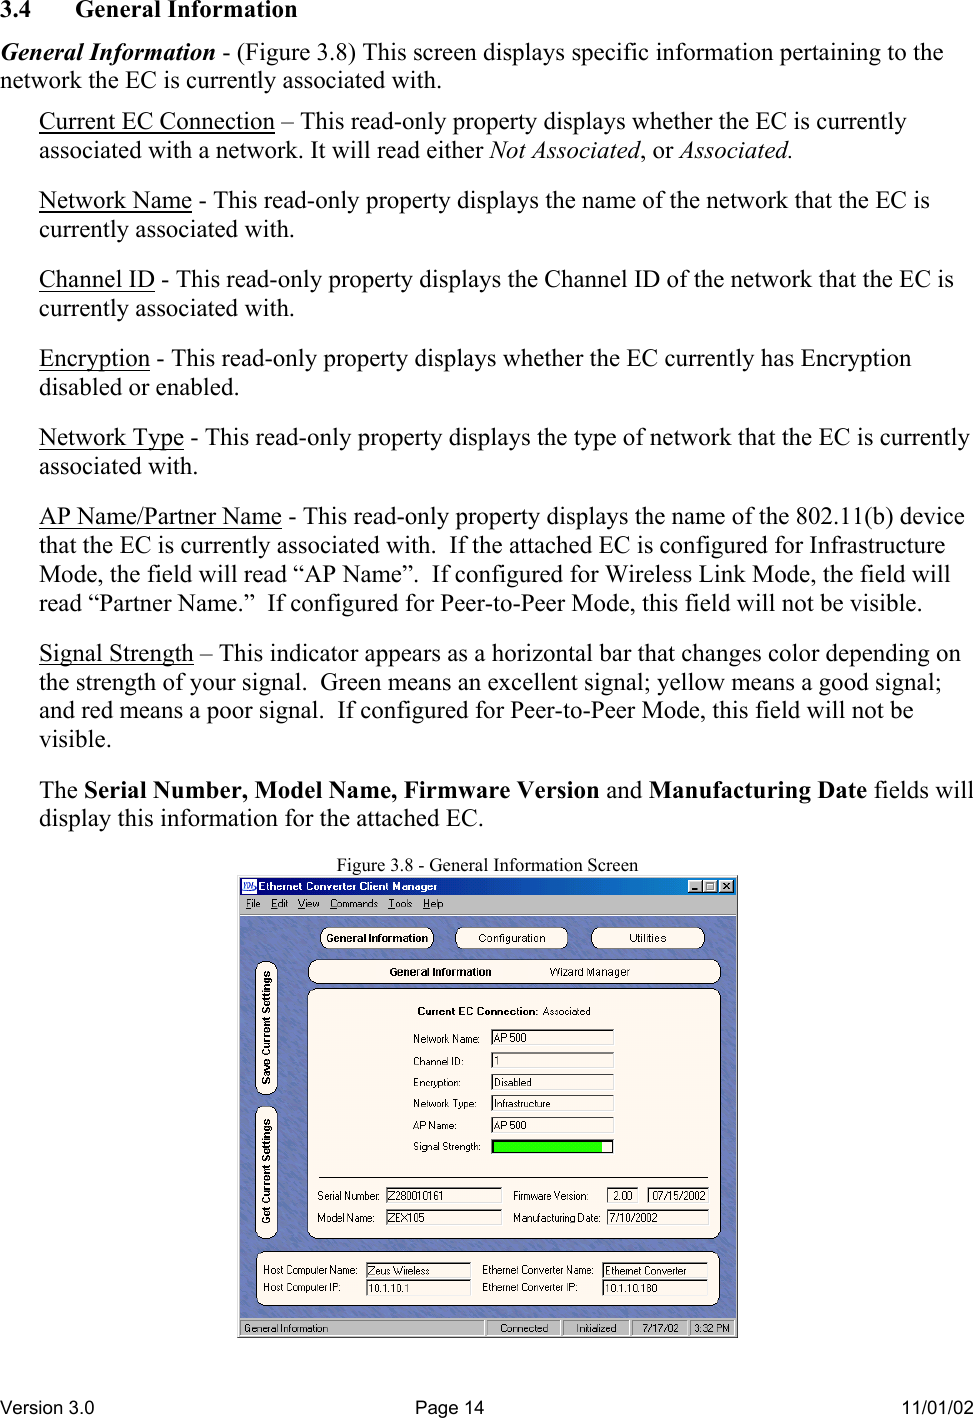 Version 3.0  Page 14  11/01/02 3.4 General Information General Information - (Figure 3.8) This screen displays specific information pertaining to the network the EC is currently associated with.  Current EC Connection – This read-only property displays whether the EC is currently associated with a network. It will read either Not Associated, or Associated.  Network Name - This read-only property displays the name of the network that the EC is currently associated with.  Channel ID - This read-only property displays the Channel ID of the network that the EC is currently associated with.  Encryption - This read-only property displays whether the EC currently has Encryption disabled or enabled.  Network Type - This read-only property displays the type of network that the EC is currently associated with.  AP Name/Partner Name - This read-only property displays the name of the 802.11(b) device that the EC is currently associated with.  If the attached EC is configured for Infrastructure Mode, the field will read “AP Name”.  If configured for Wireless Link Mode, the field will read “Partner Name.”  If configured for Peer-to-Peer Mode, this field will not be visible.   Signal Strength – This indicator appears as a horizontal bar that changes color depending on the strength of your signal.  Green means an excellent signal; yellow means a good signal; and red means a poor signal.  If configured for Peer-to-Peer Mode, this field will not be visible.  The Serial Number, Model Name, Firmware Version and Manufacturing Date fields will display this information for the attached EC.  Figure 3.8 - General Information Screen  